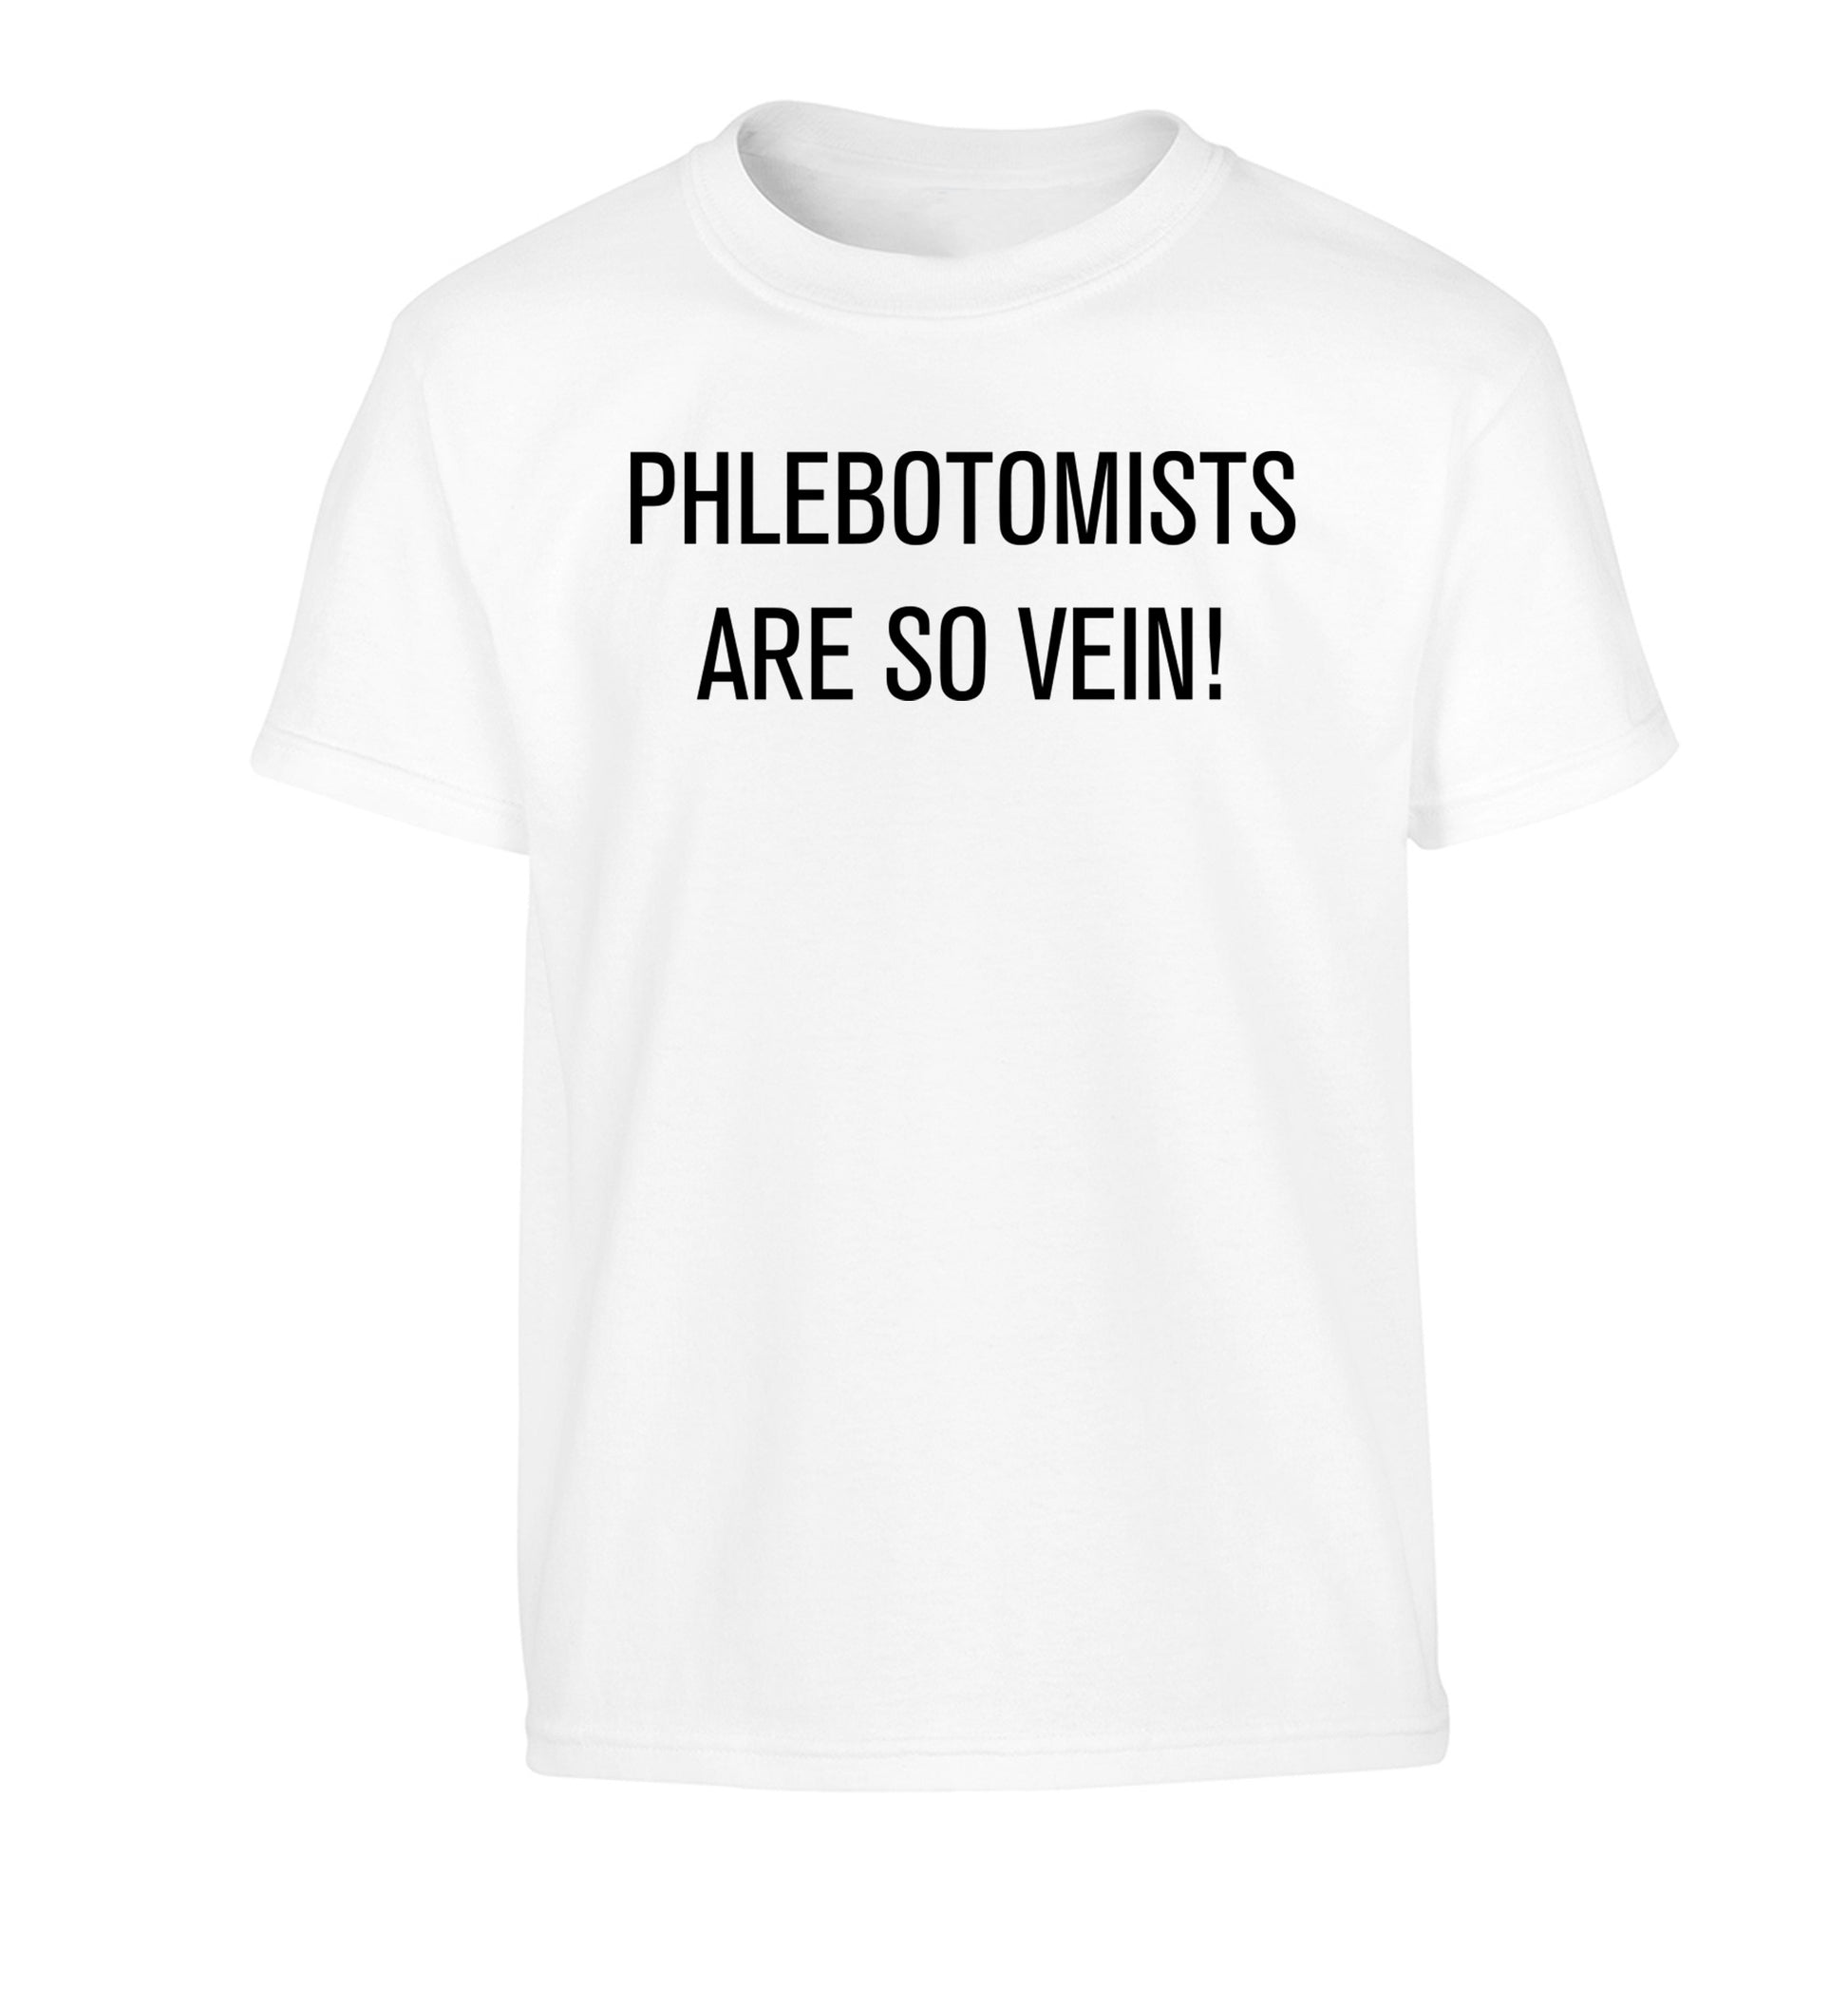 Phlebotomists are so vein! Children's white Tshirt 12-14 Years